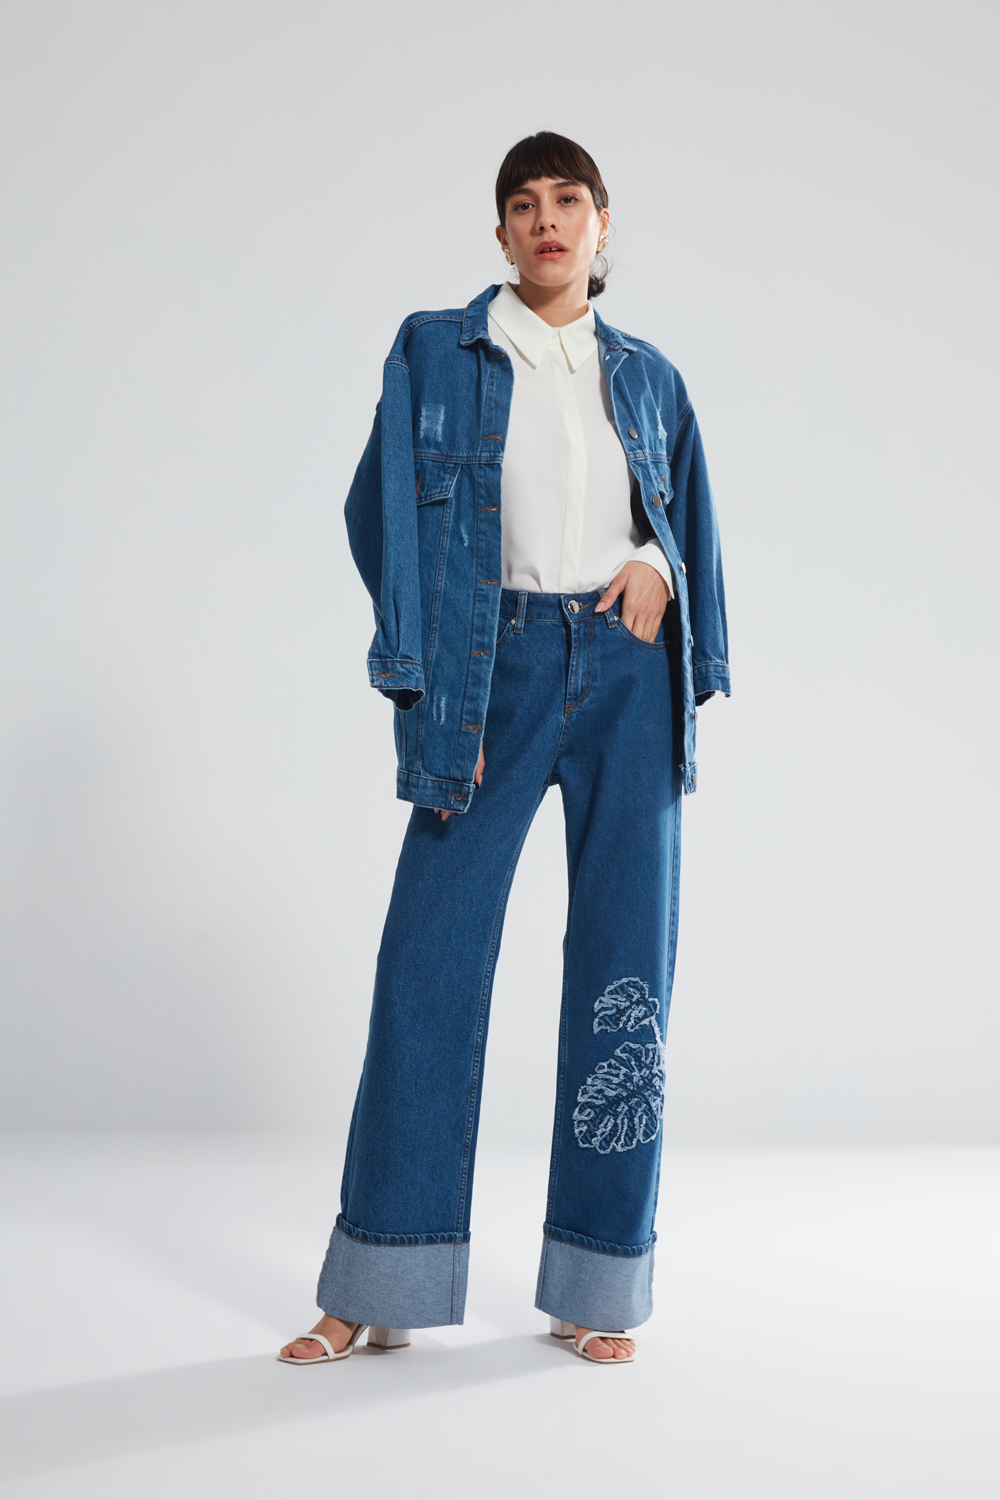 Laser Embroidered Blue High Waist Jean Trousers